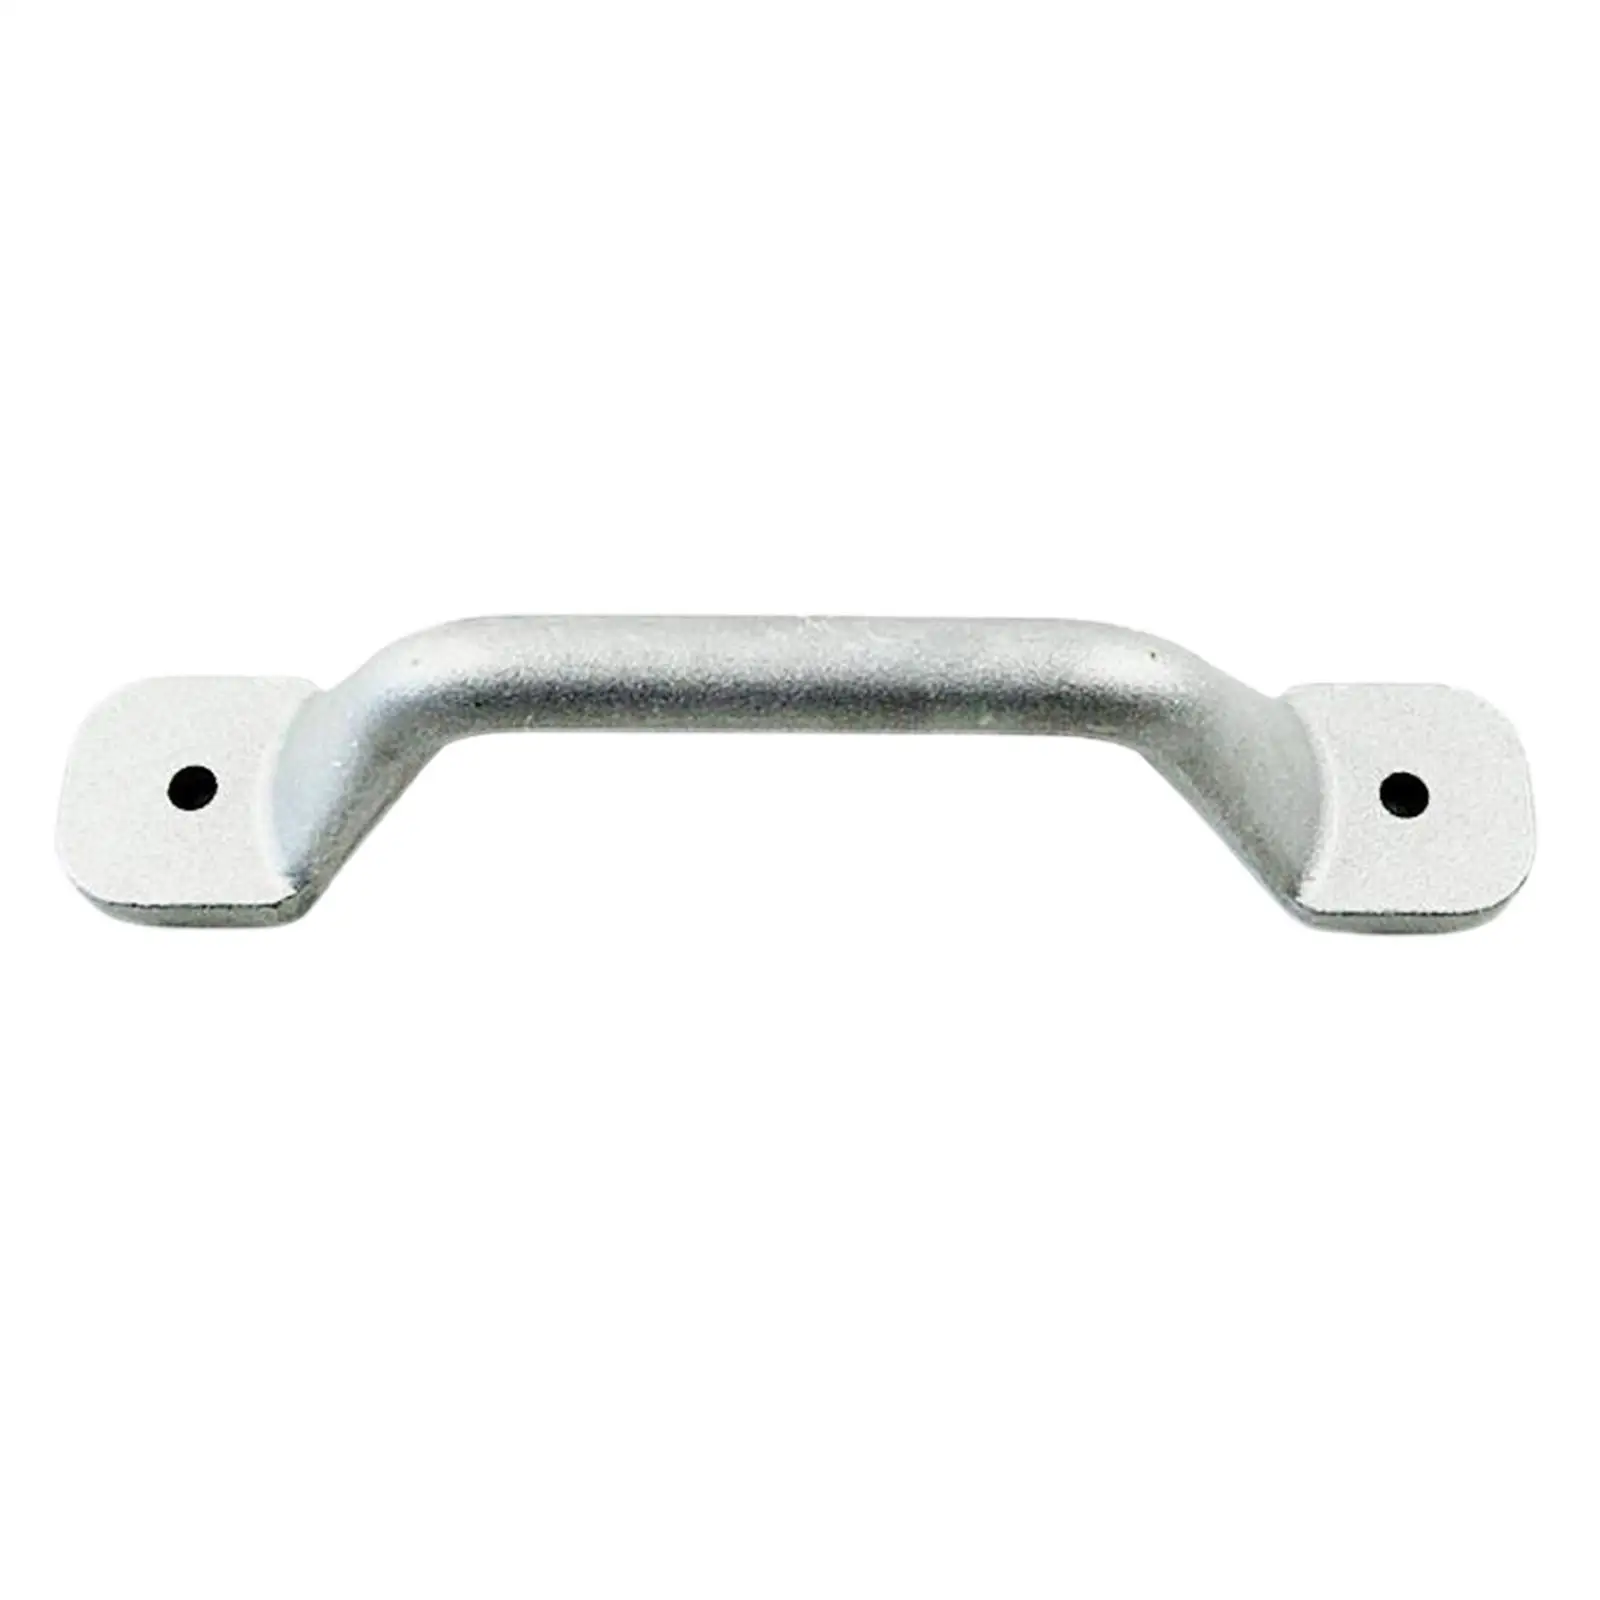 Aluminum Grab Entry  Bar Replaces for RV, Trailer, Camper Boat